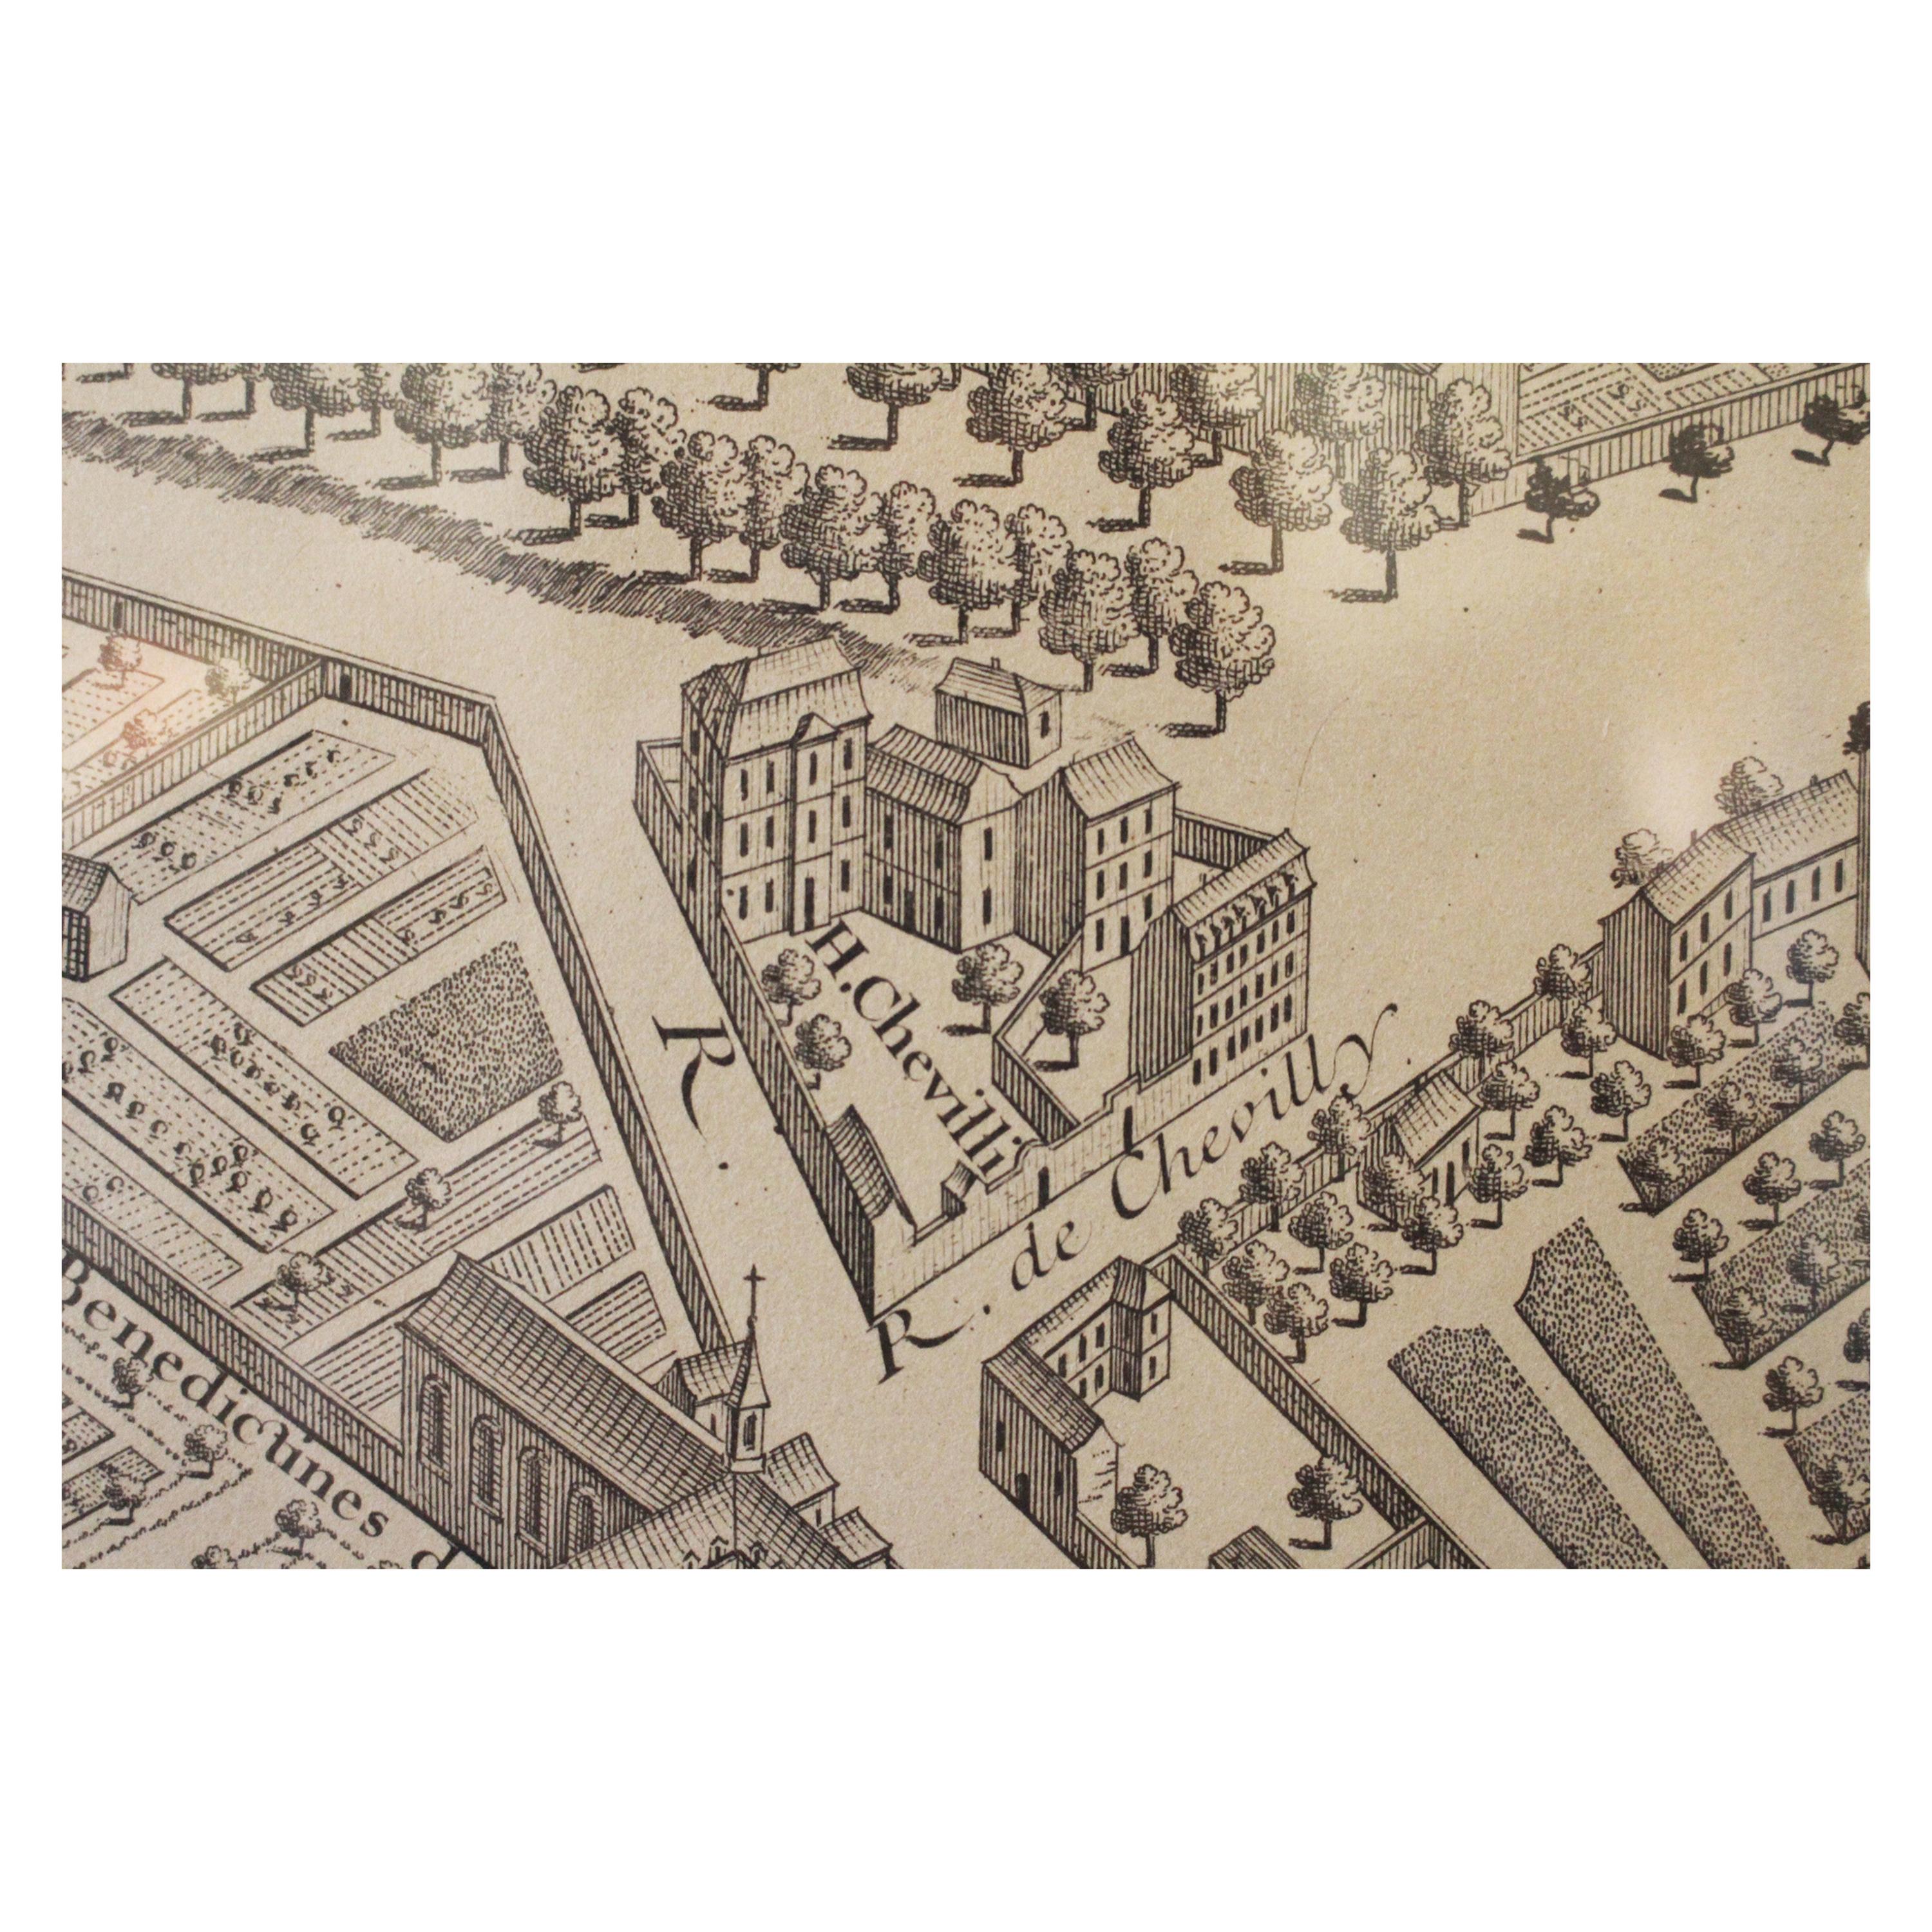 Twenty maps fitting together to create one large view of Paris. Drawn from a hot air balloon. Originally engraved in 1739, these were printed by the Louvre in the 1930s. Acid free backing, with museum plexiglass, UV filter.